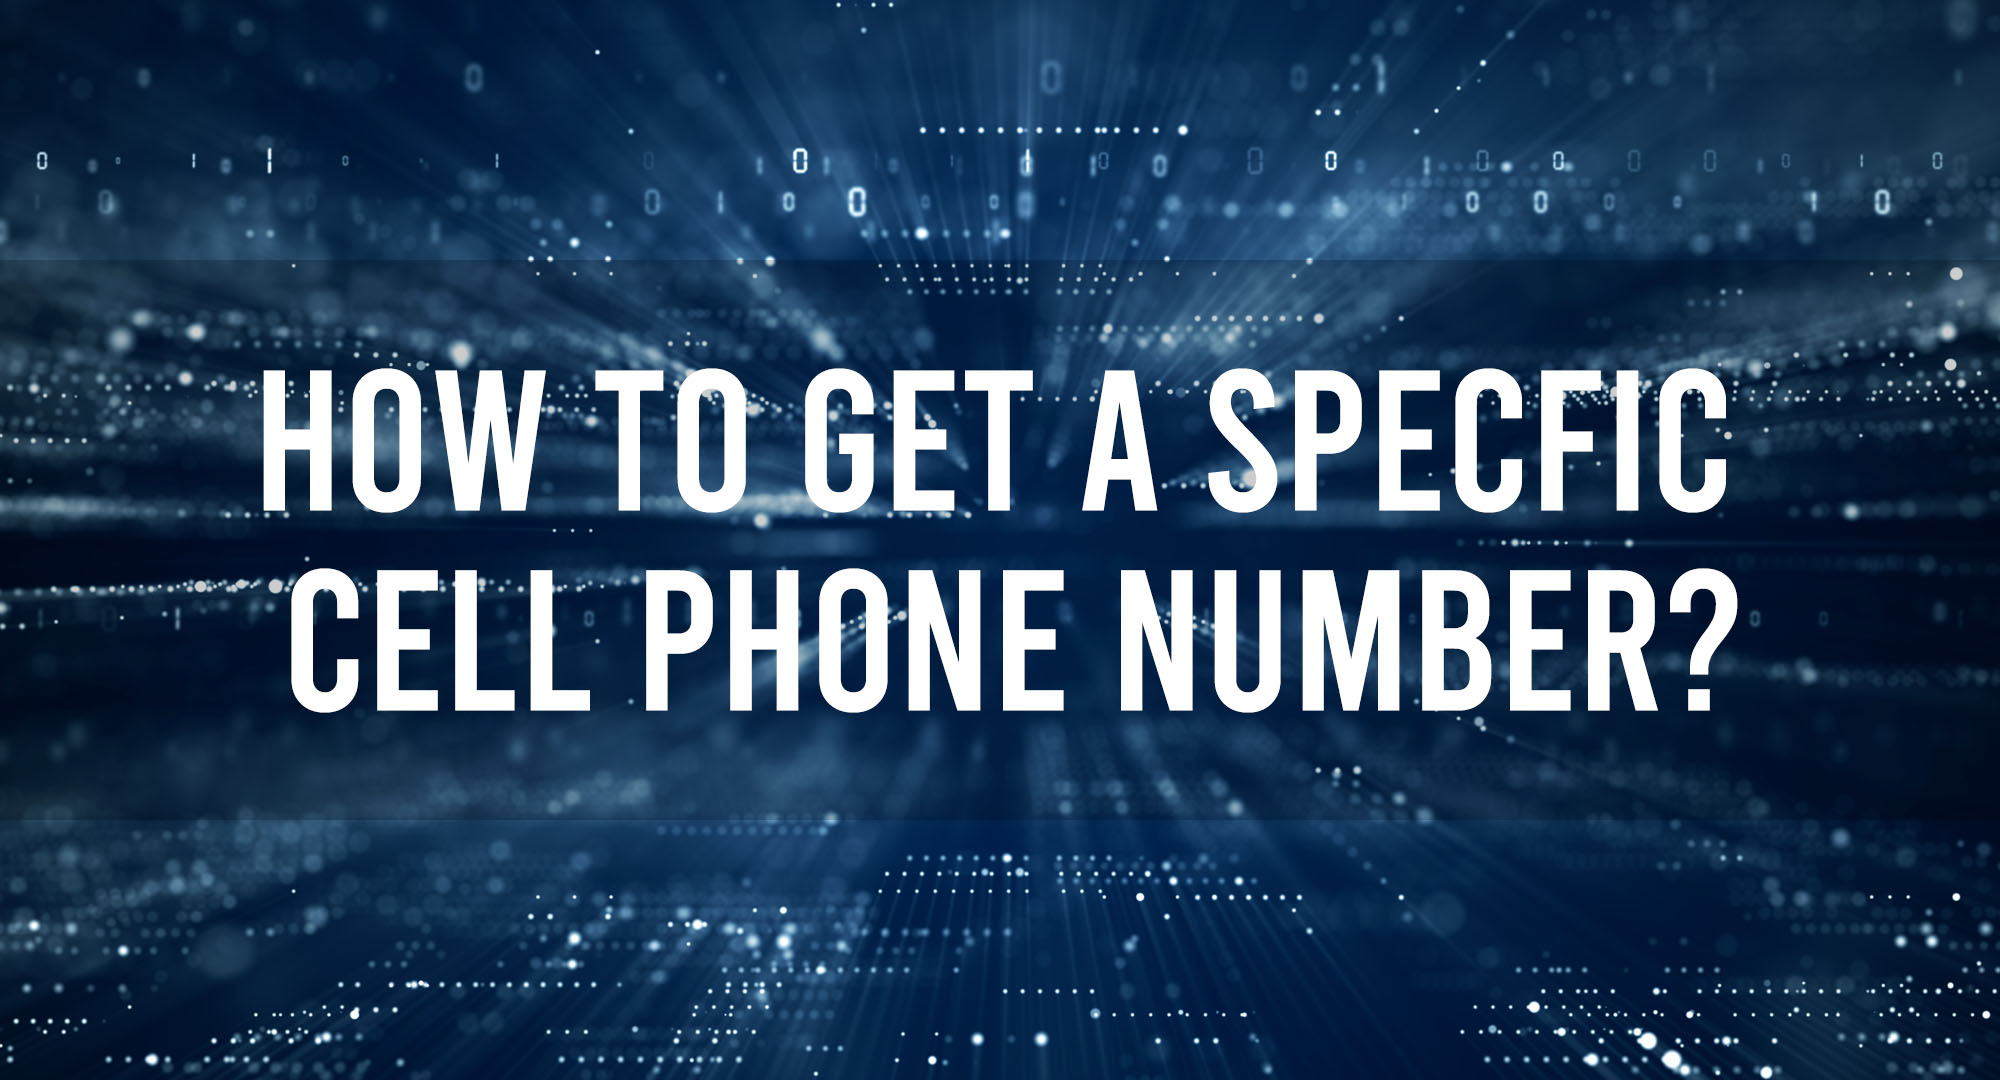 How to get a specific cell phone number